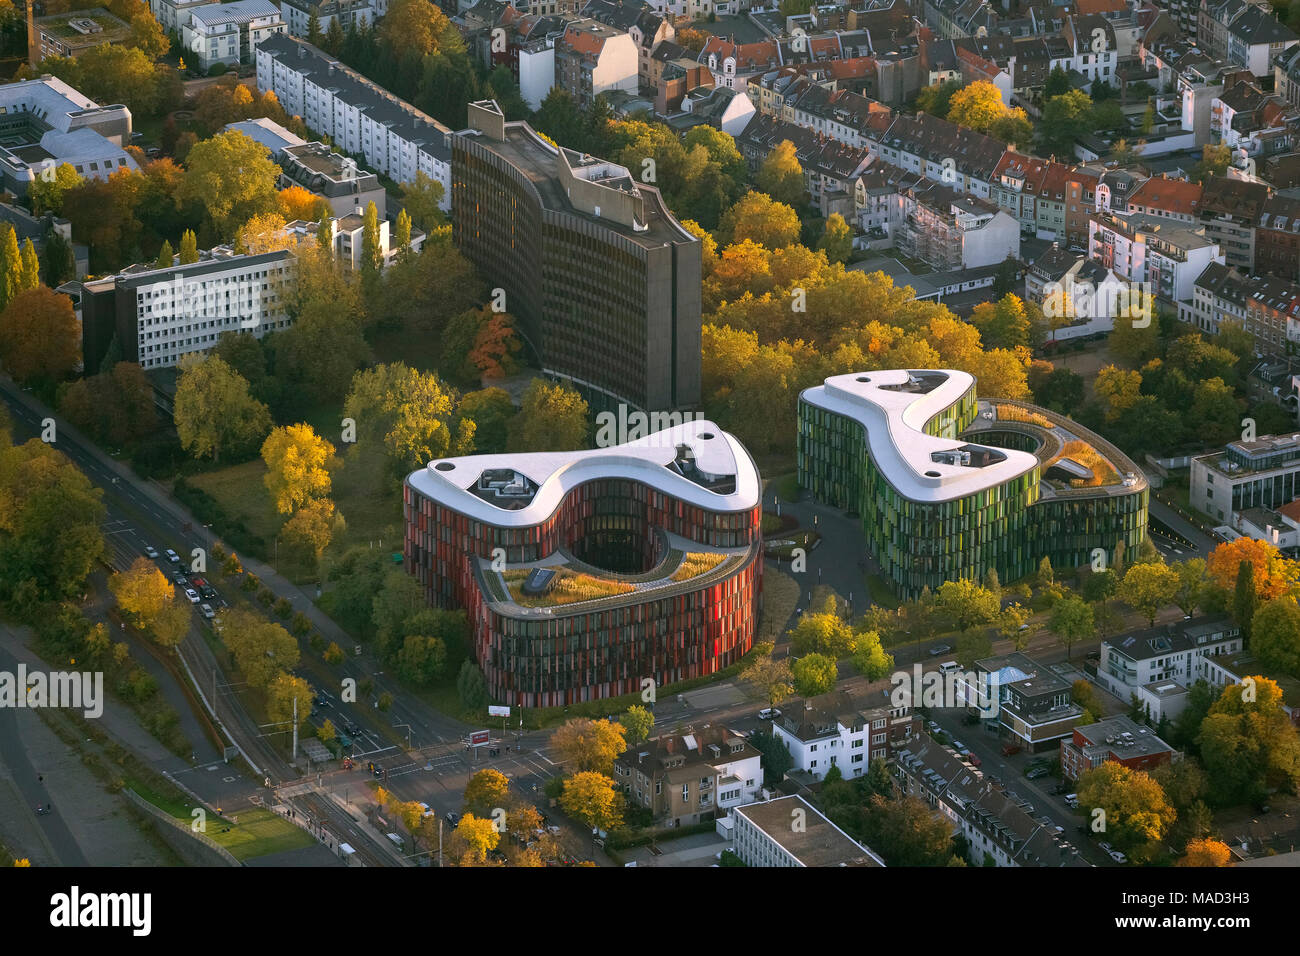 Aerial view, Cologne Oval Offices, modern architecture, Gustav-Heinemann-Ufer, Cologne, Rhineland, Cologne Bay, North Rhine-Westphalia, Germany, Europ Stock Photo